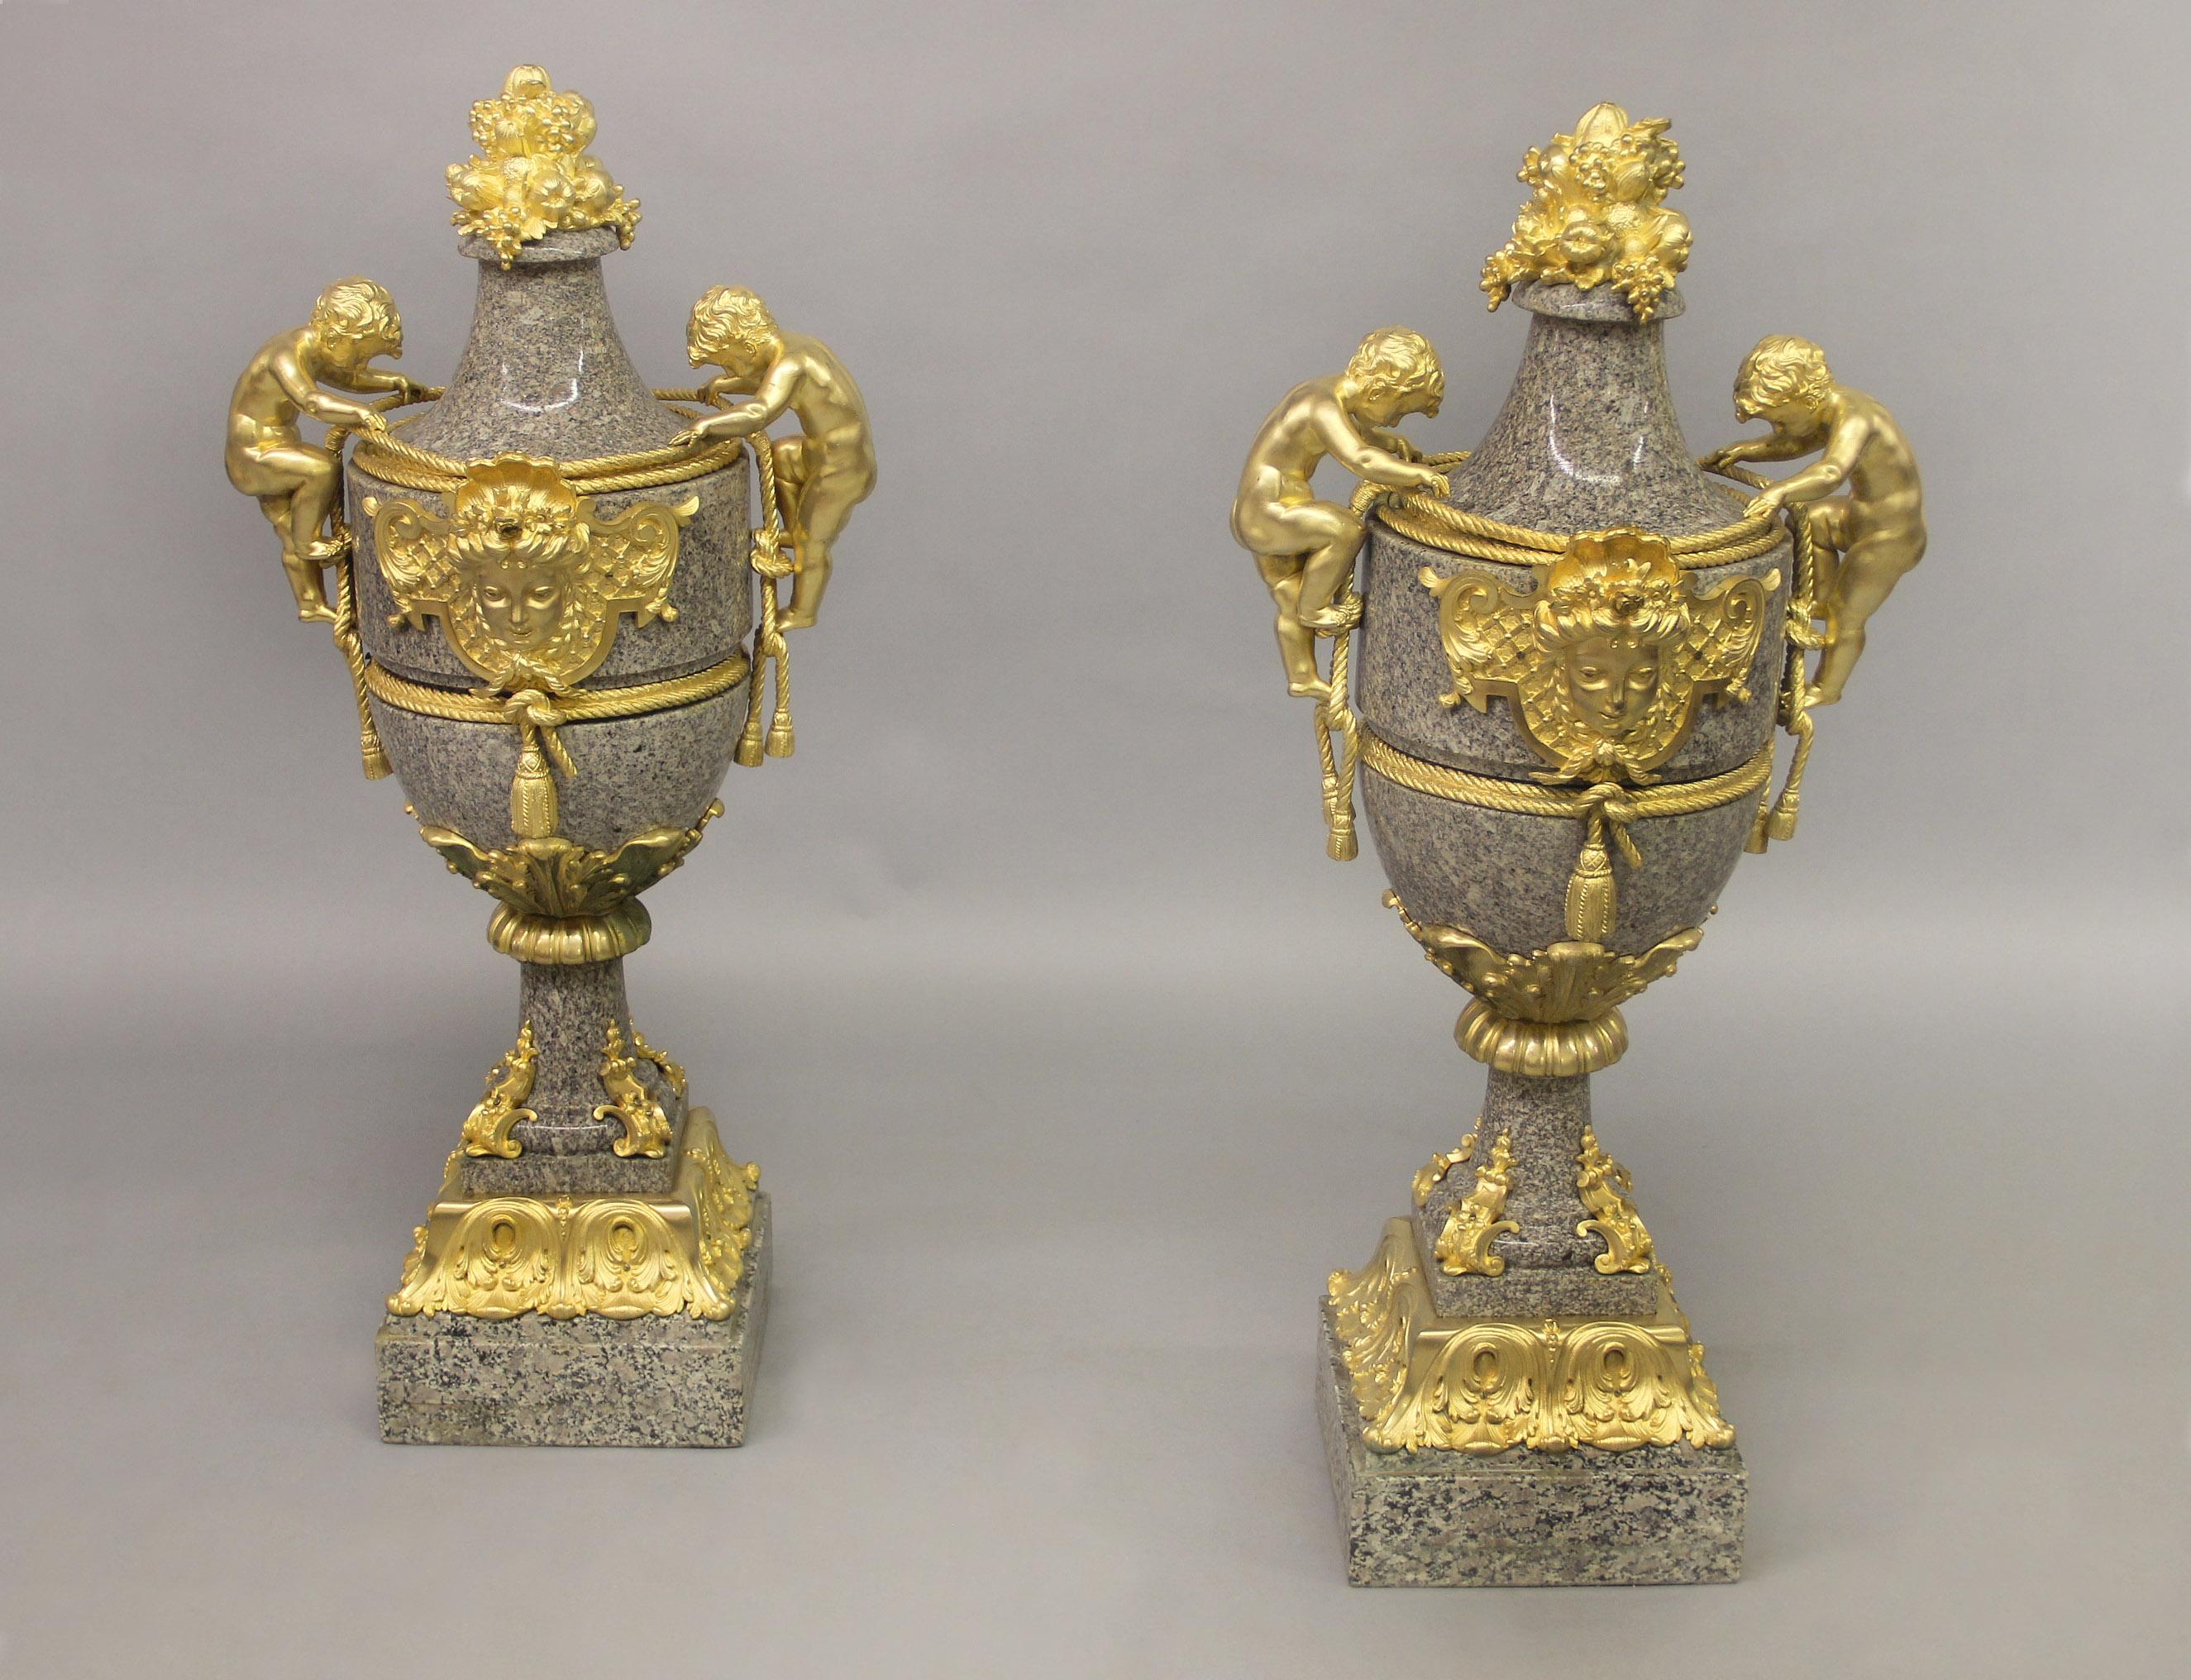 An excellent quality pair of large late 19th century gilt bronze mounted granite vases

Each vase surrounded by bronze rope and tassels with large climbing putto handles, centered with a beautiful female mask, the top with fruiting finials and the